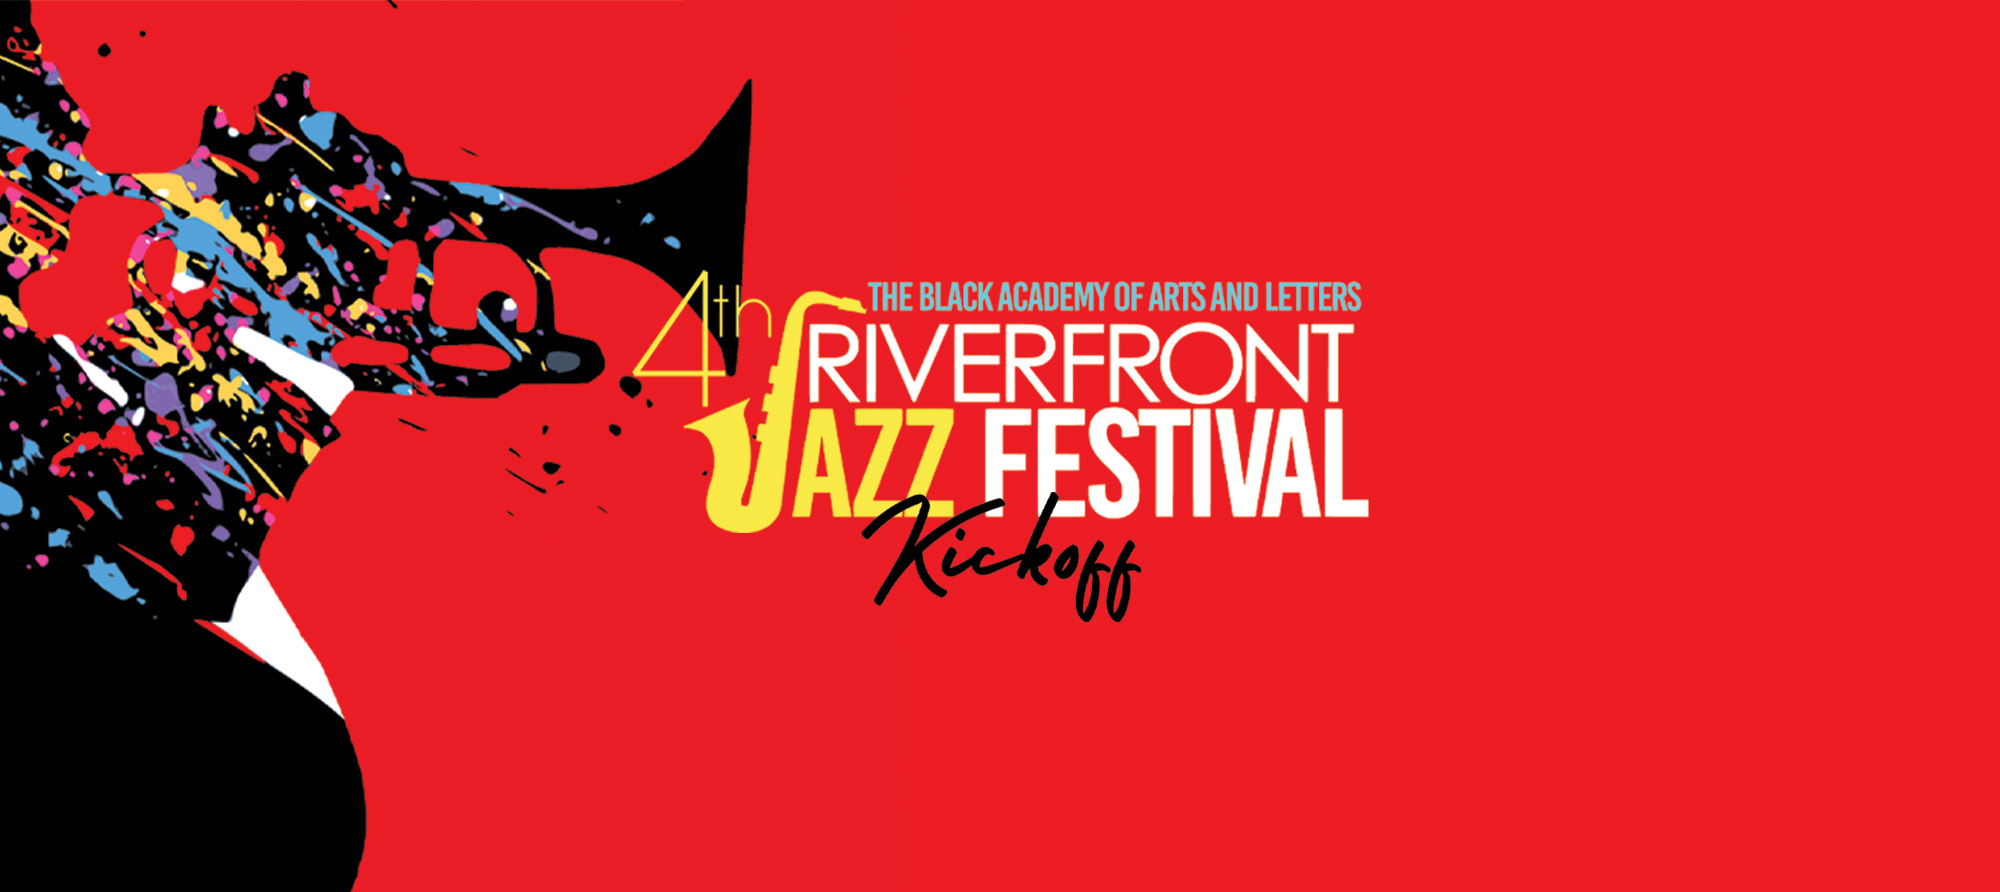 Riverfront Jazz Festival Kickoff Dallas, Texas AT&T Discovery District